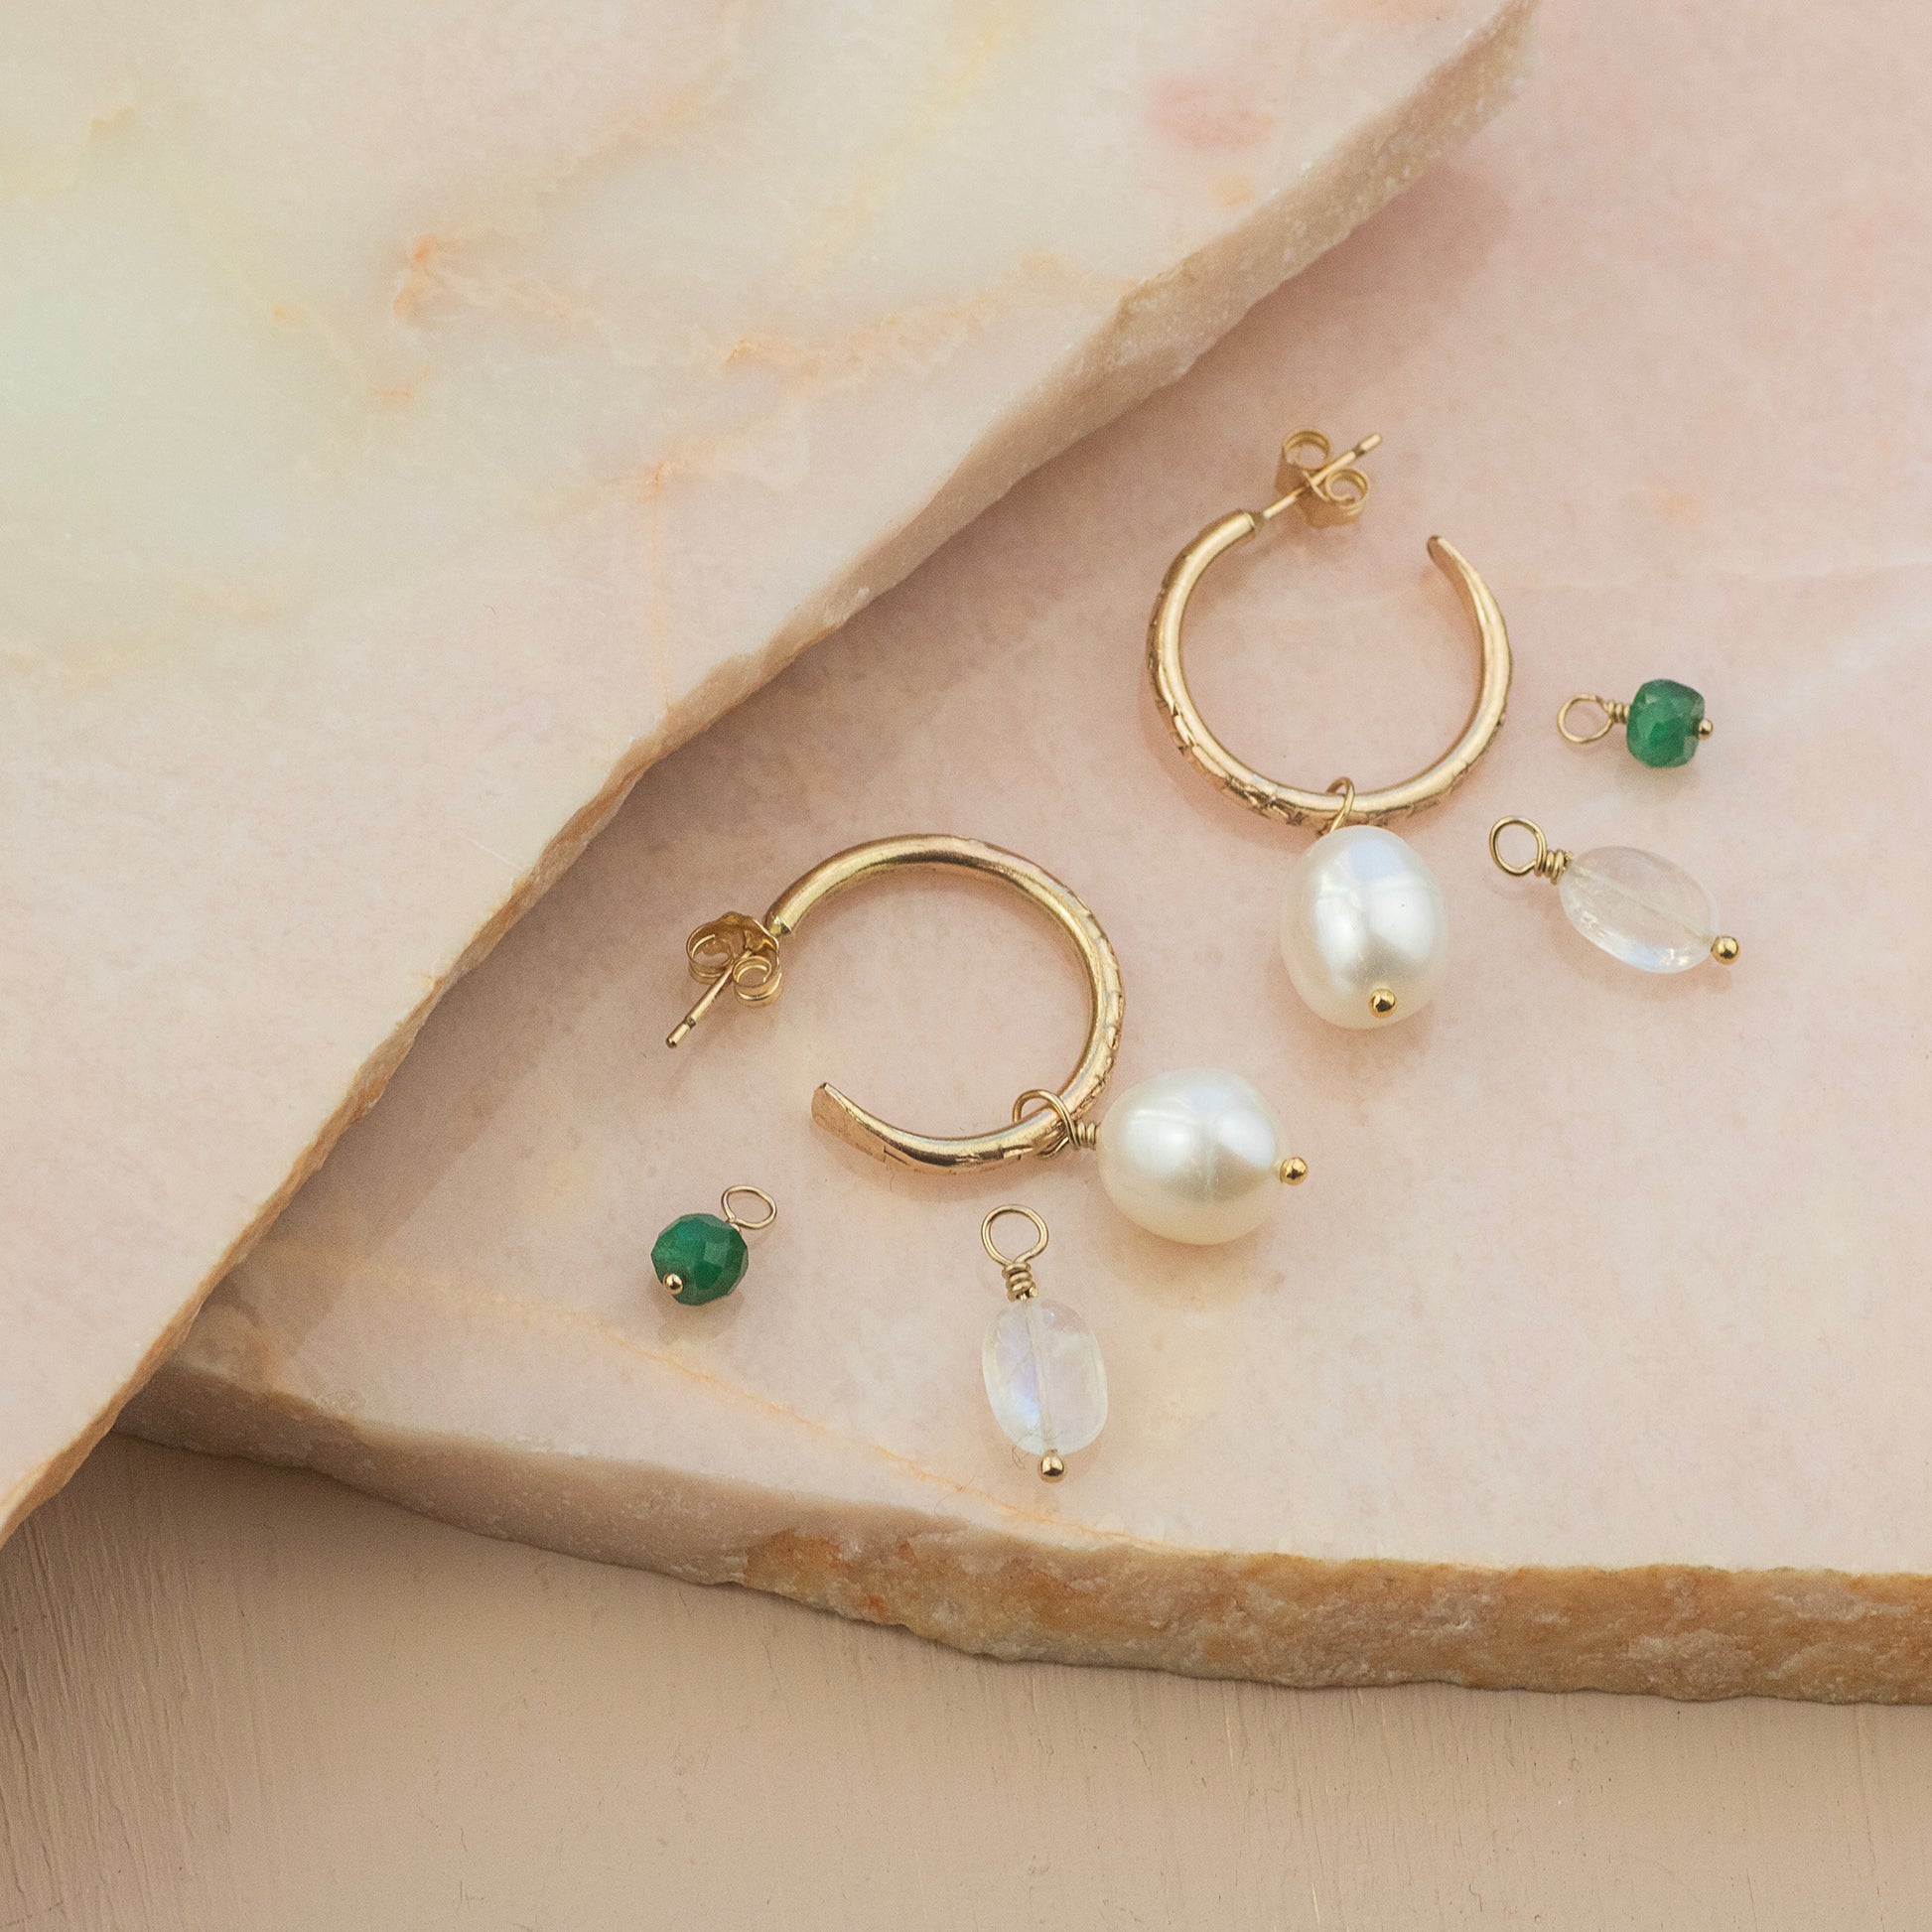 Petite Gold Hoops with 3 Charms - Pearl, Moonstone & Emerald